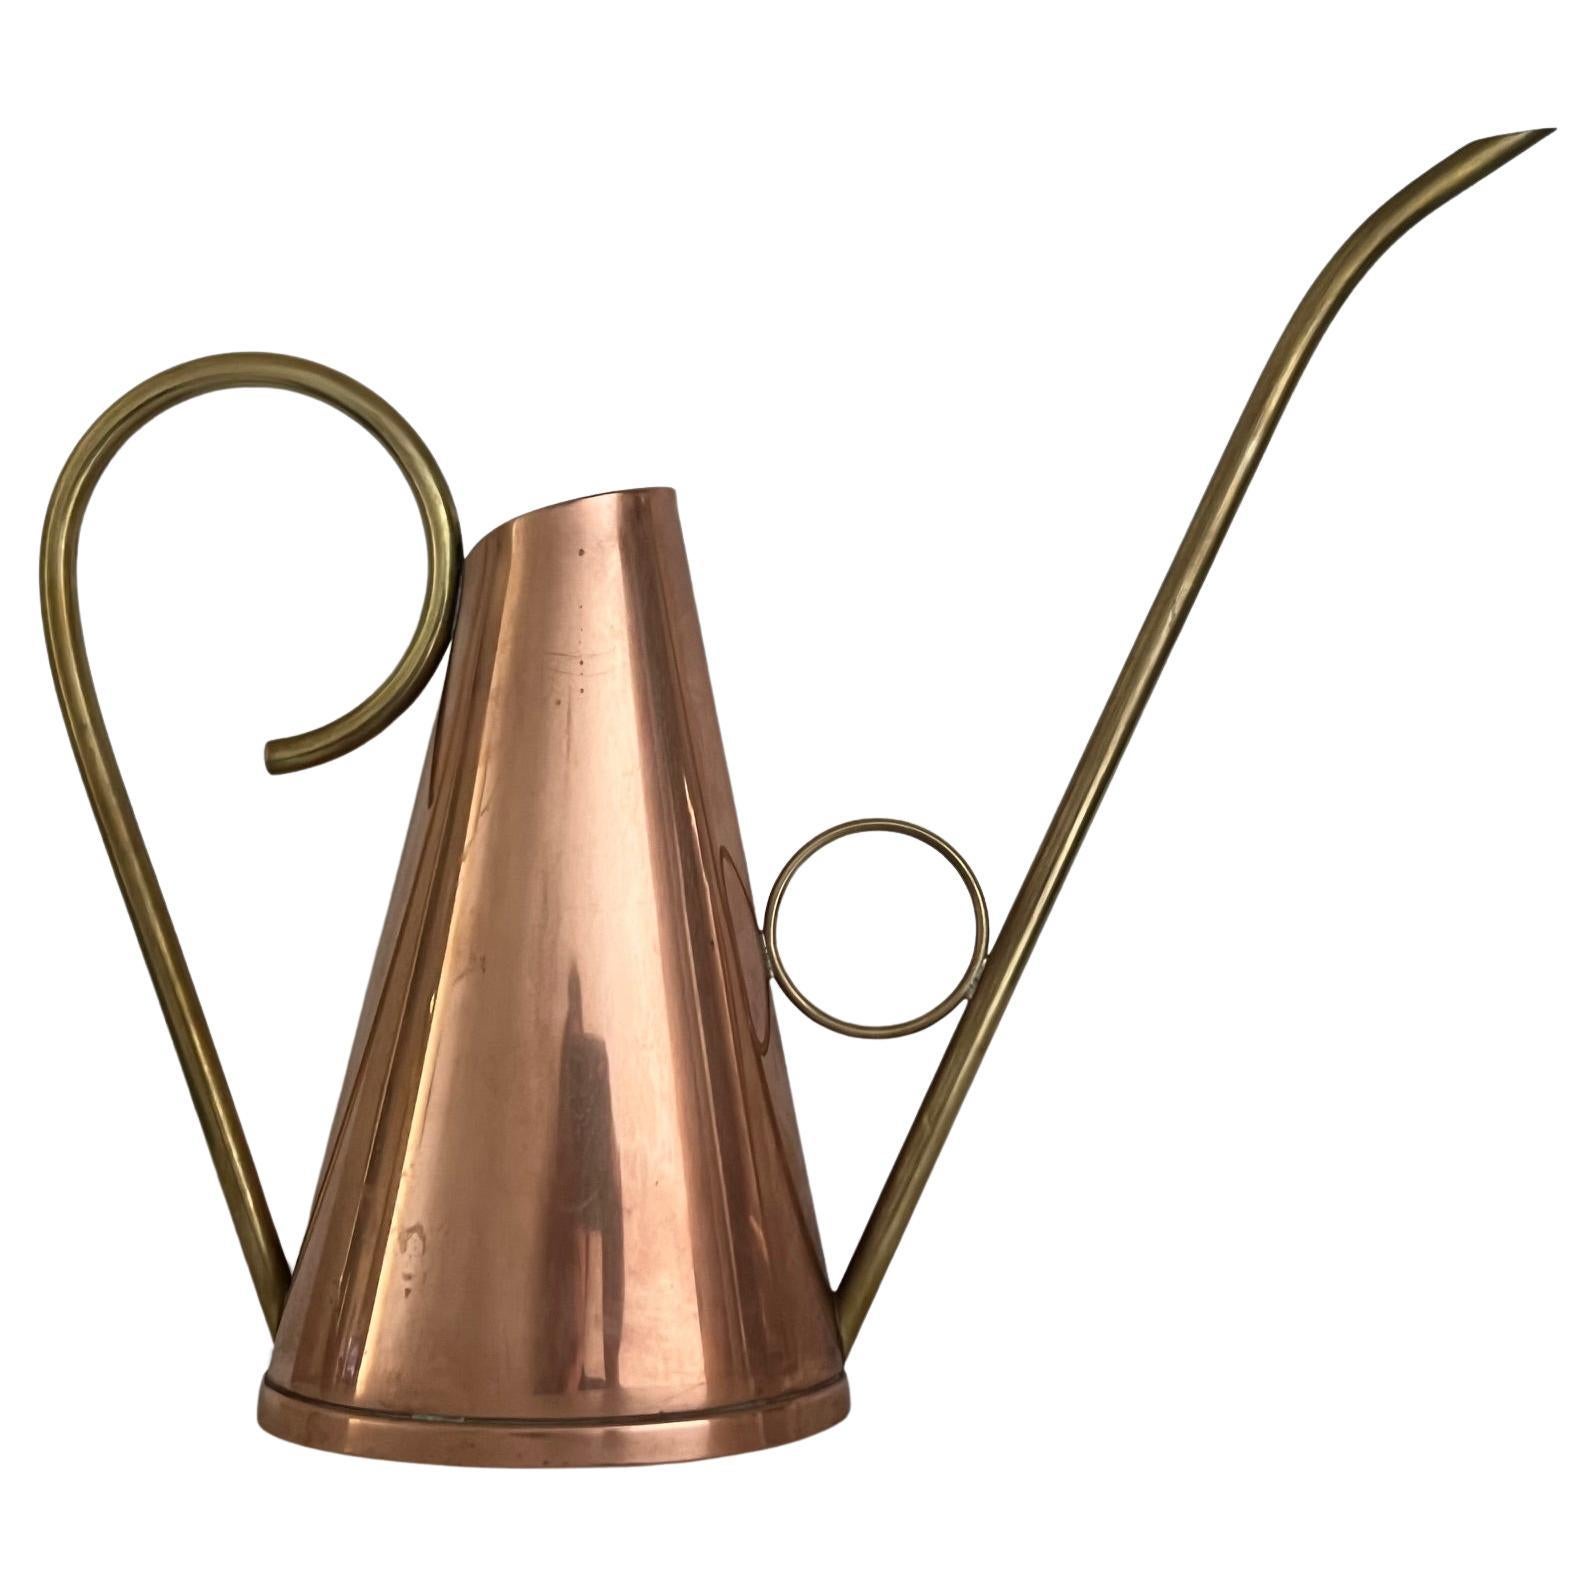 Vintage brass and copper watering can made in Denmark, stamped Haandarb. The part that holds water is 7.6